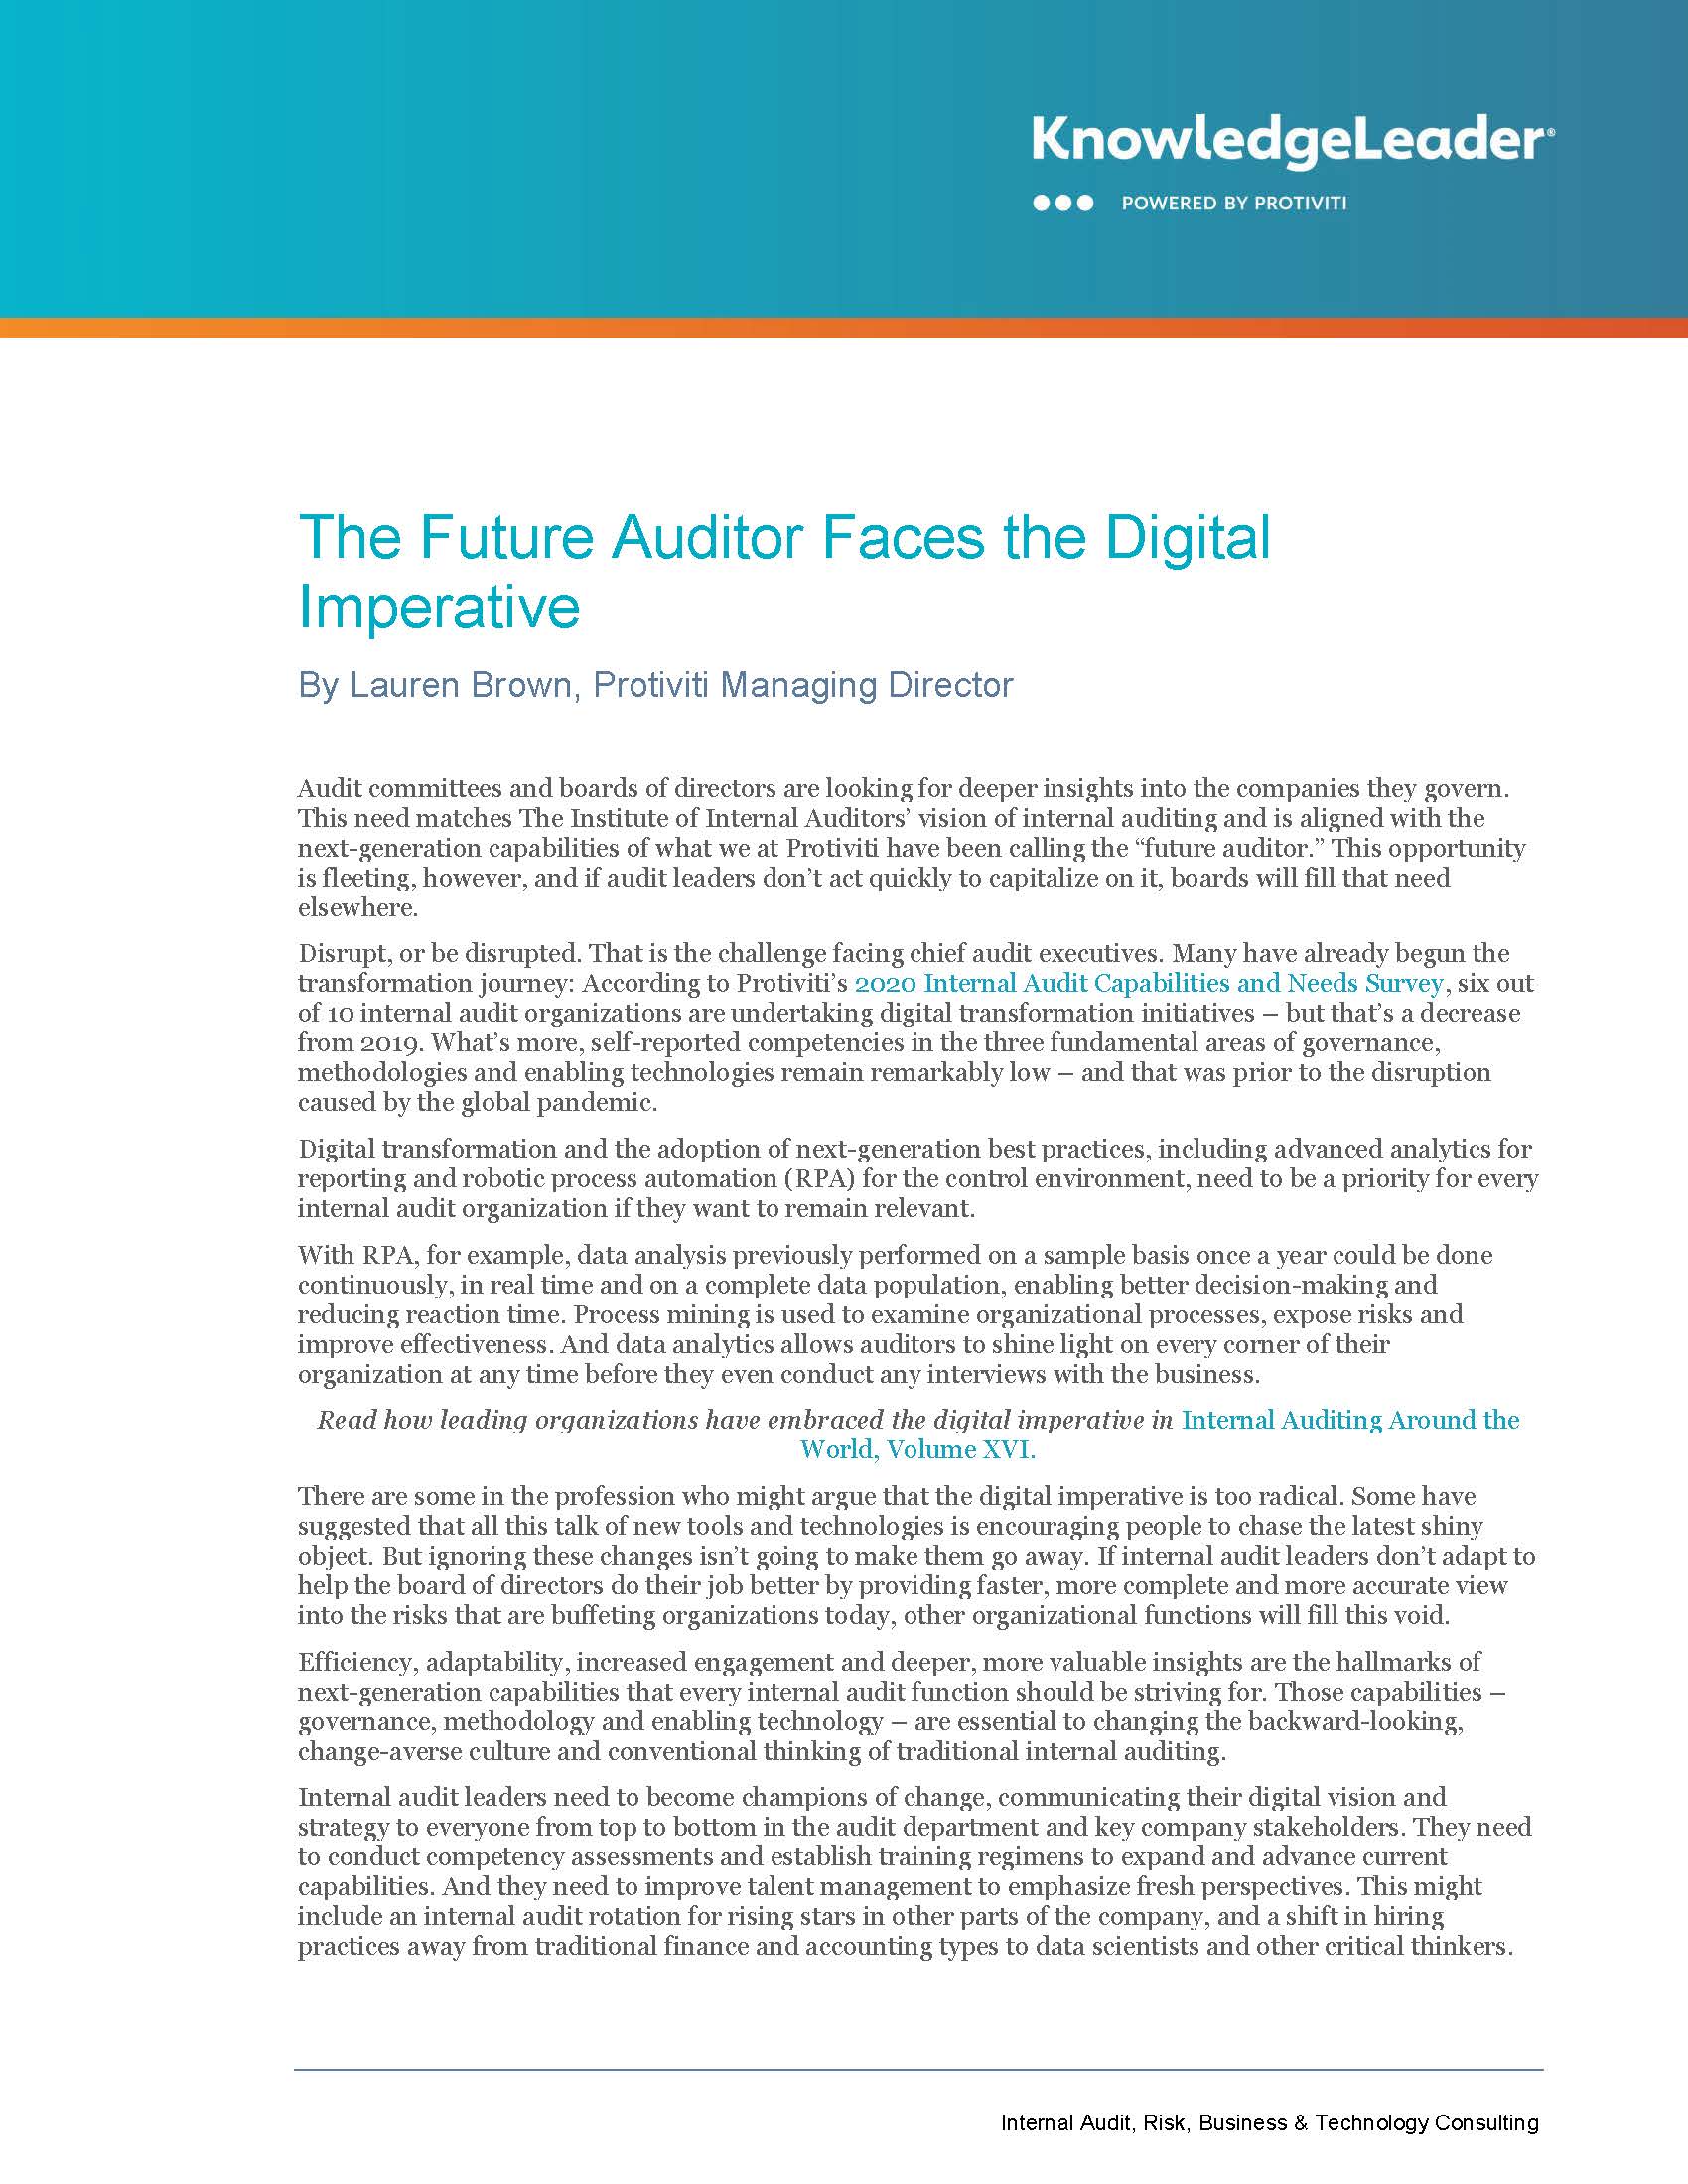 Screenshot of the first page of The Future Auditor Faces the Digital Imperative